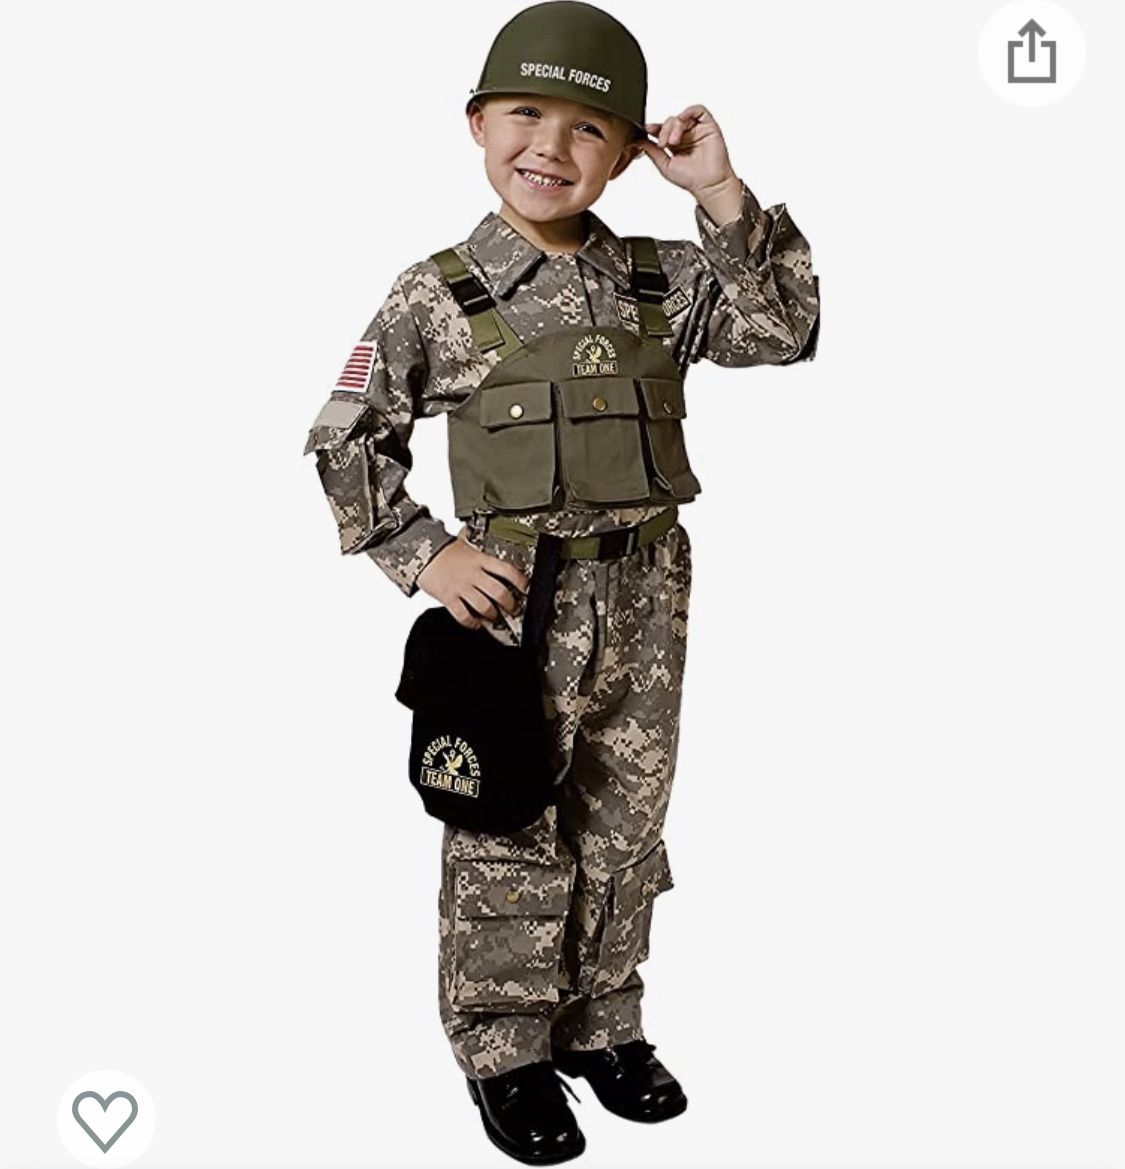 U.S. Special Forces Dress-Up Costume For Kids Age 12-14 Size L 